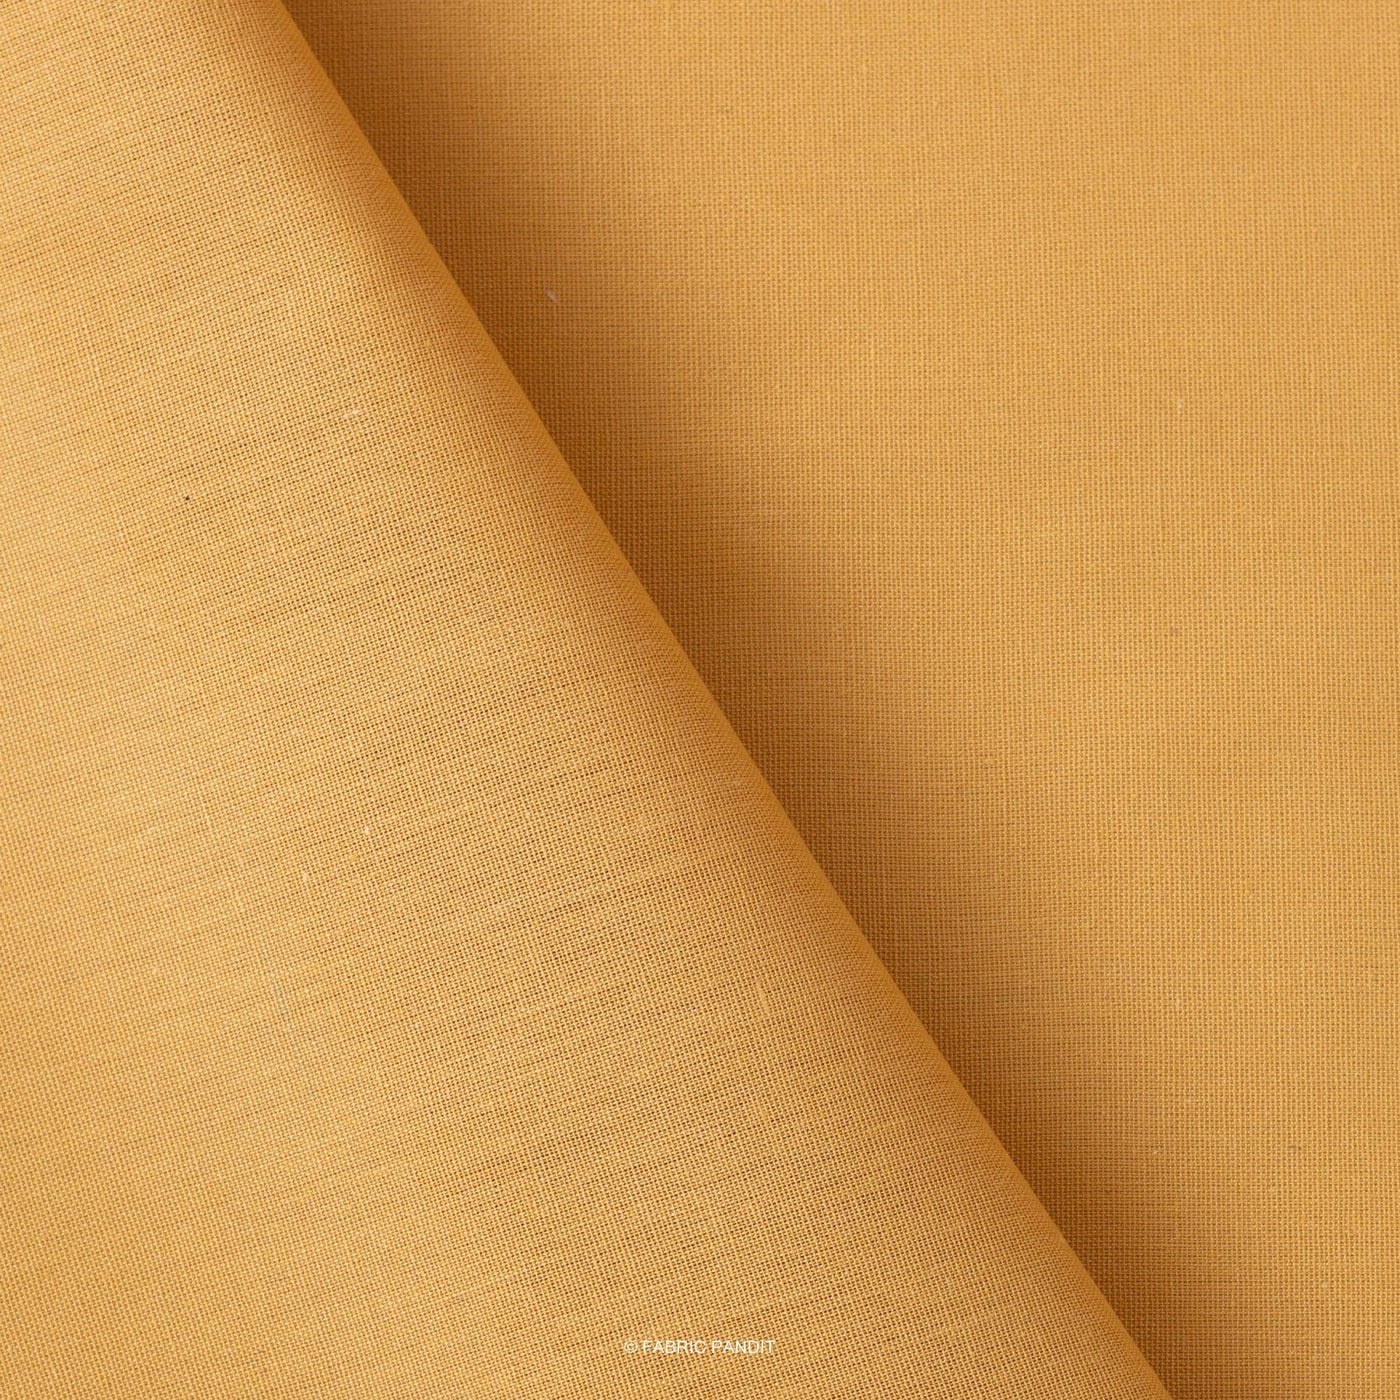 Fabric Pandit Fabric Golden Sand Color Pure Cotton Linen Fabric (Width - 58 Inches)